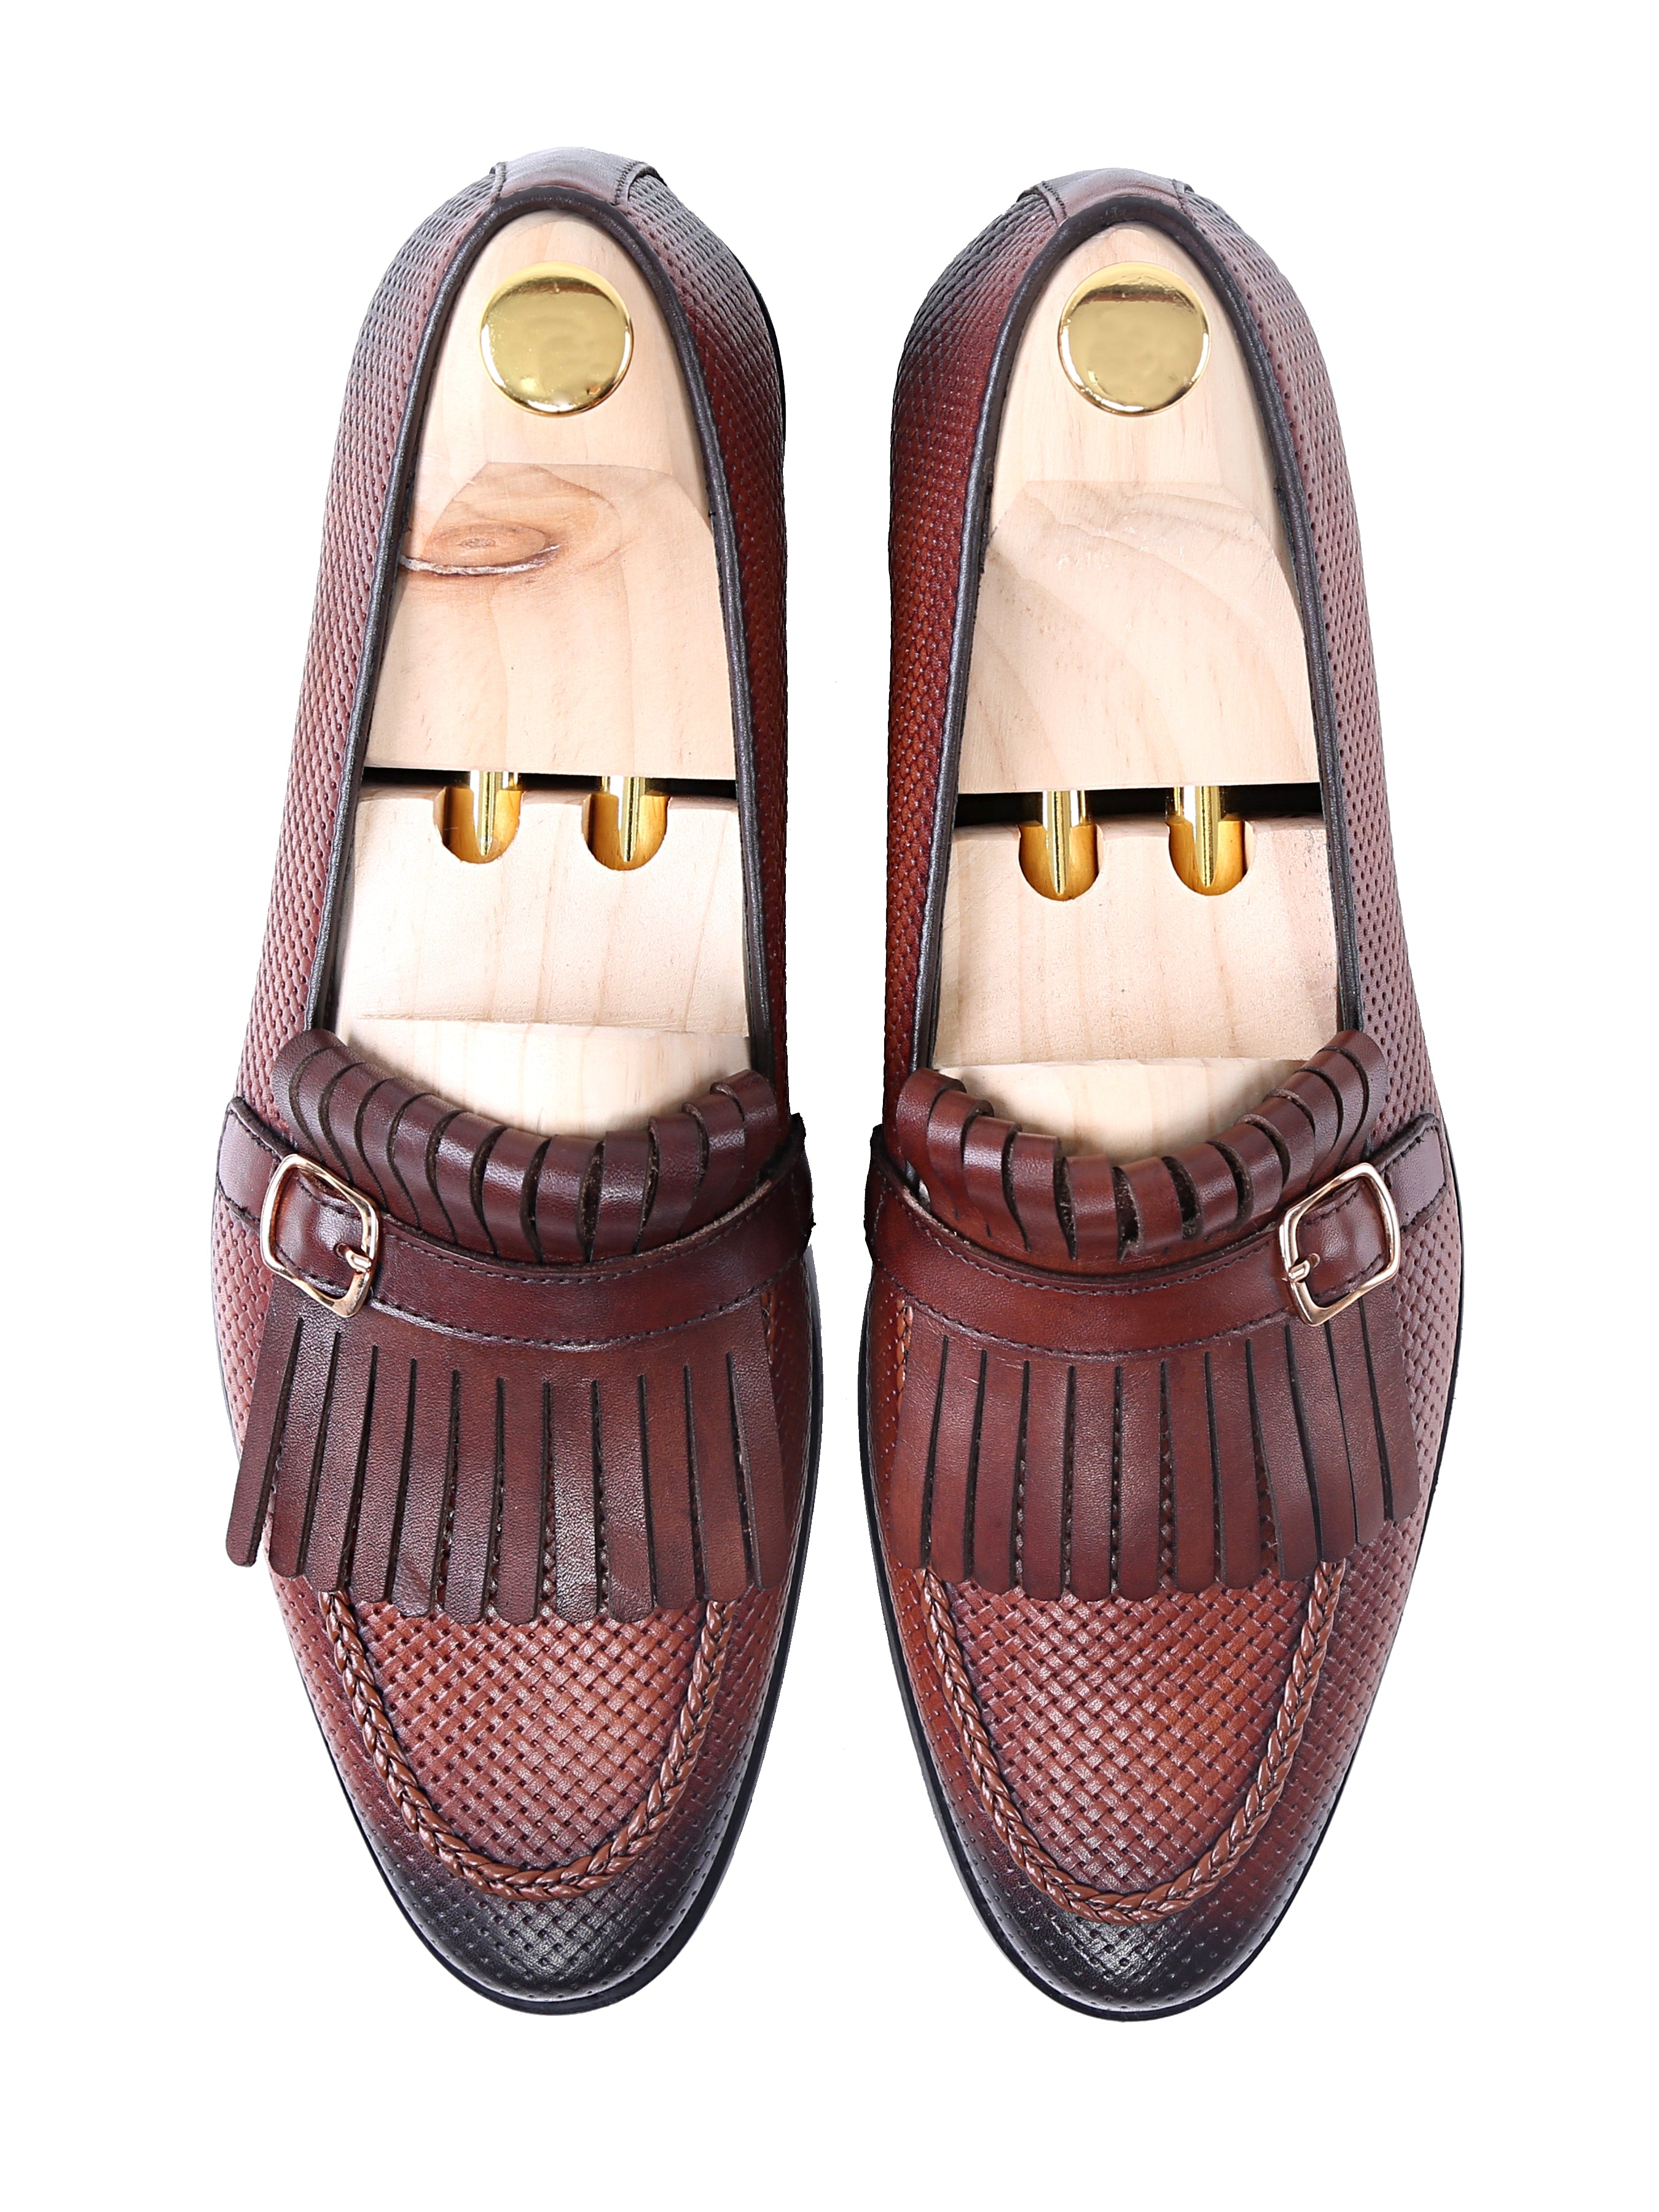 Fringe Kiltie Loafer - Cognac Tan Woven Leather with Side Buckle (Hand Painted Patina) - Zeve Shoes